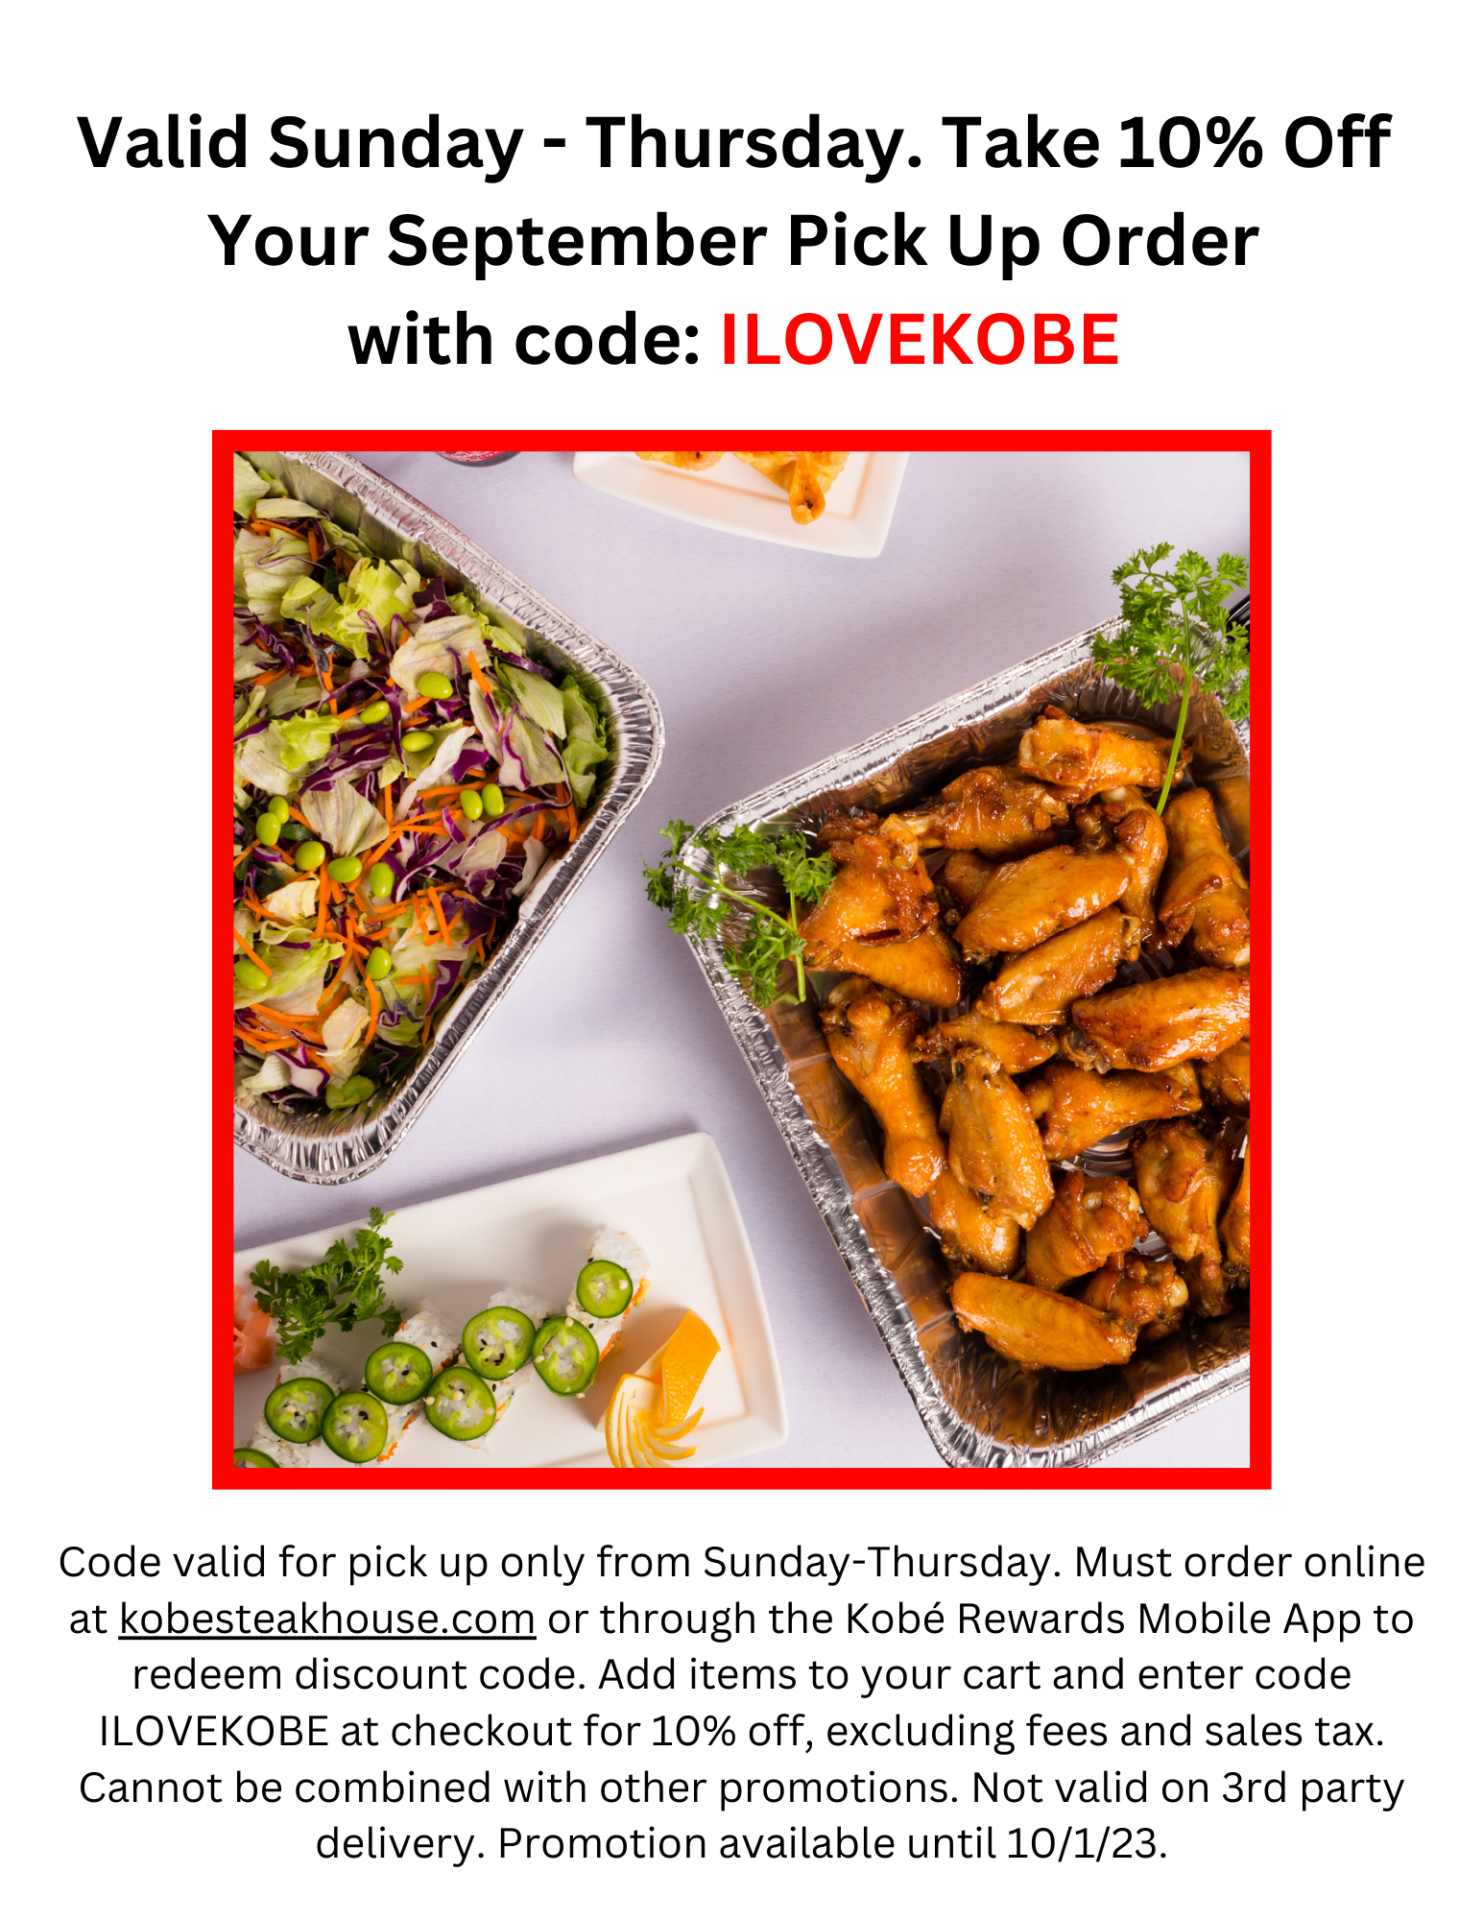 Valid Sunday - Thursday. Take 10% Off Your September Pick Up Order with code: ILOVEKOBE. Code valid for pick up only from Sunday-Thursday. Must order online at kobesteakhouse.com or through the Kobé Rewards Mobile App to redeem discount code. Add items to your cart and enter code ILOVEKOBE at checkout for 10% off, excluding fees and sales tax. Cannot be combined with other promotions. Not valid on 3rd party delivery. Promotion available until 10/1/23.